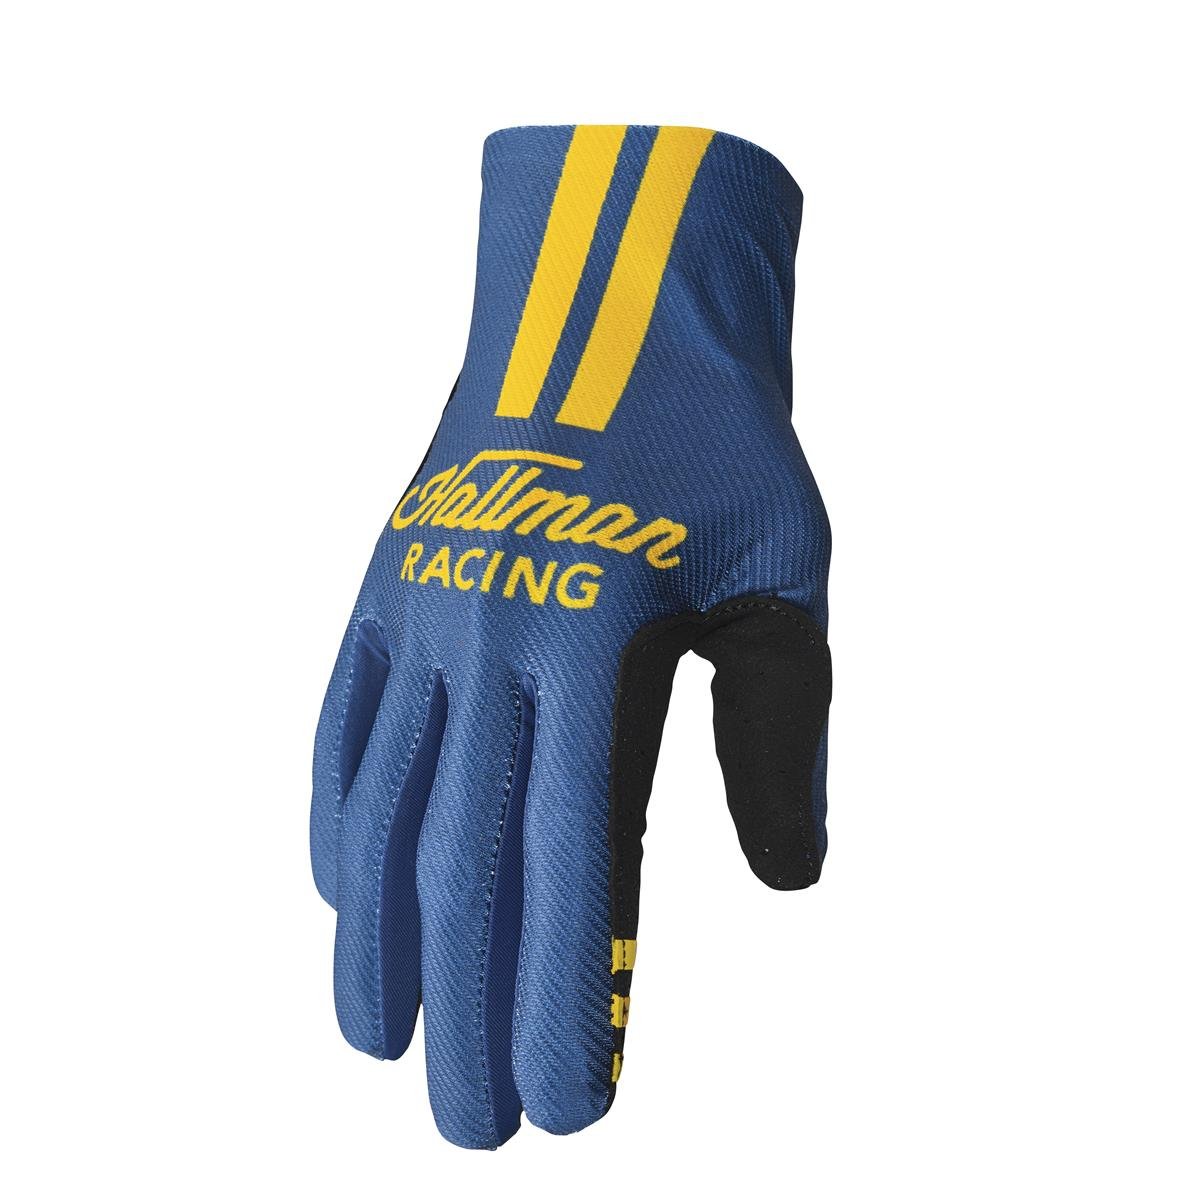 Thor Gloves Mainstay Roosted - Yellow/Navy Lemon